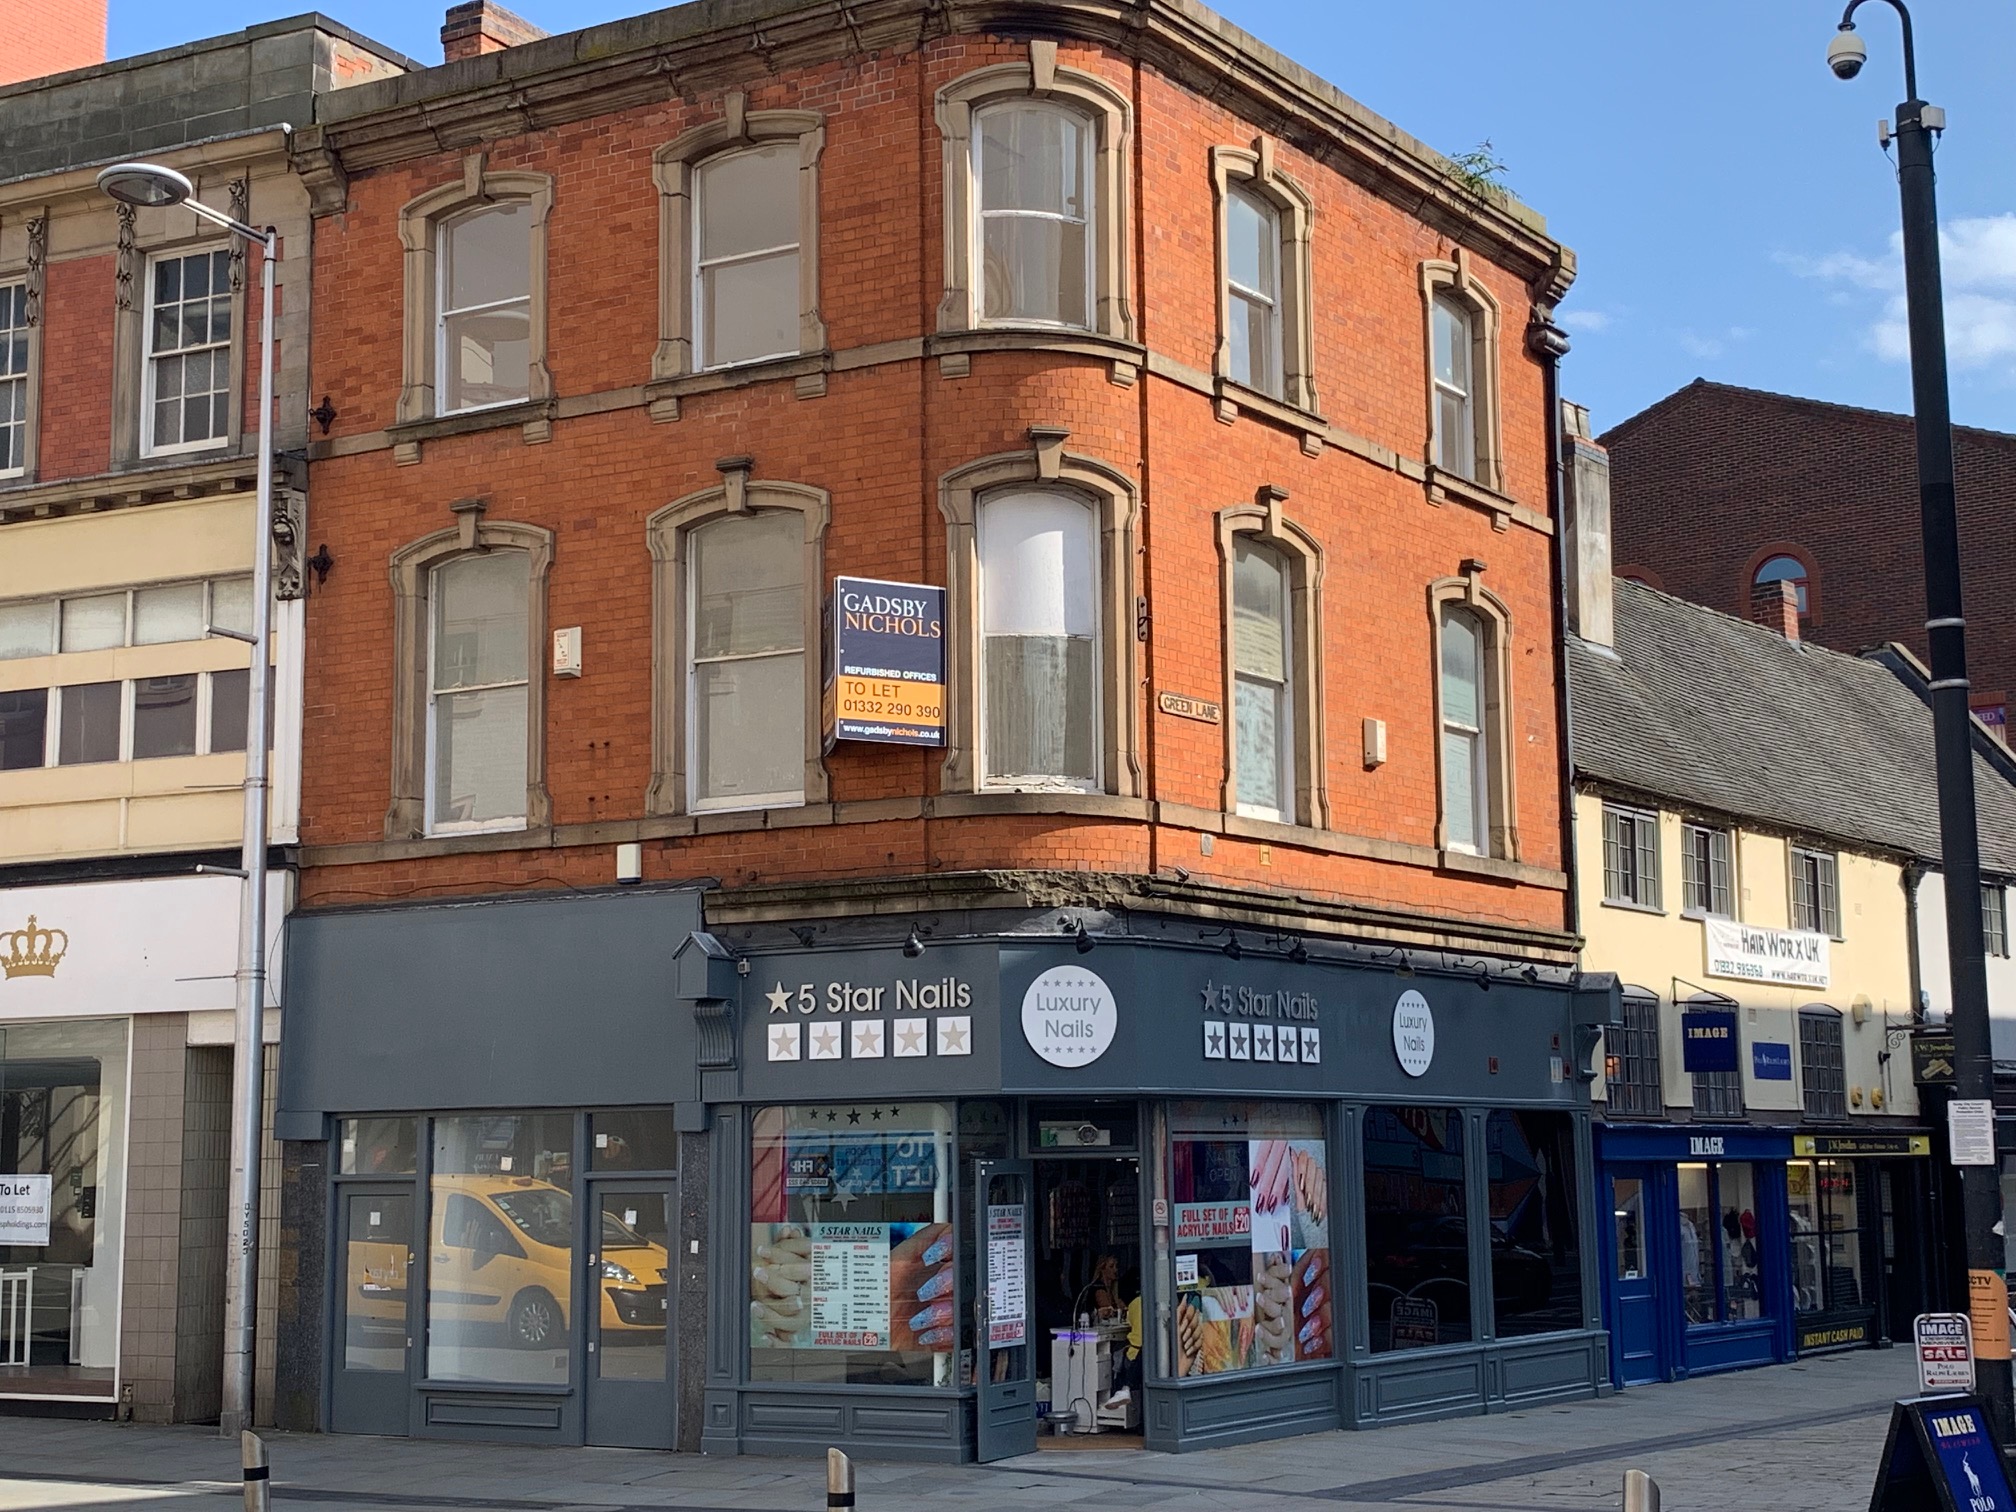 0 bed Retail Property (High Street) for rent in Derby. From Gadsby Nichols